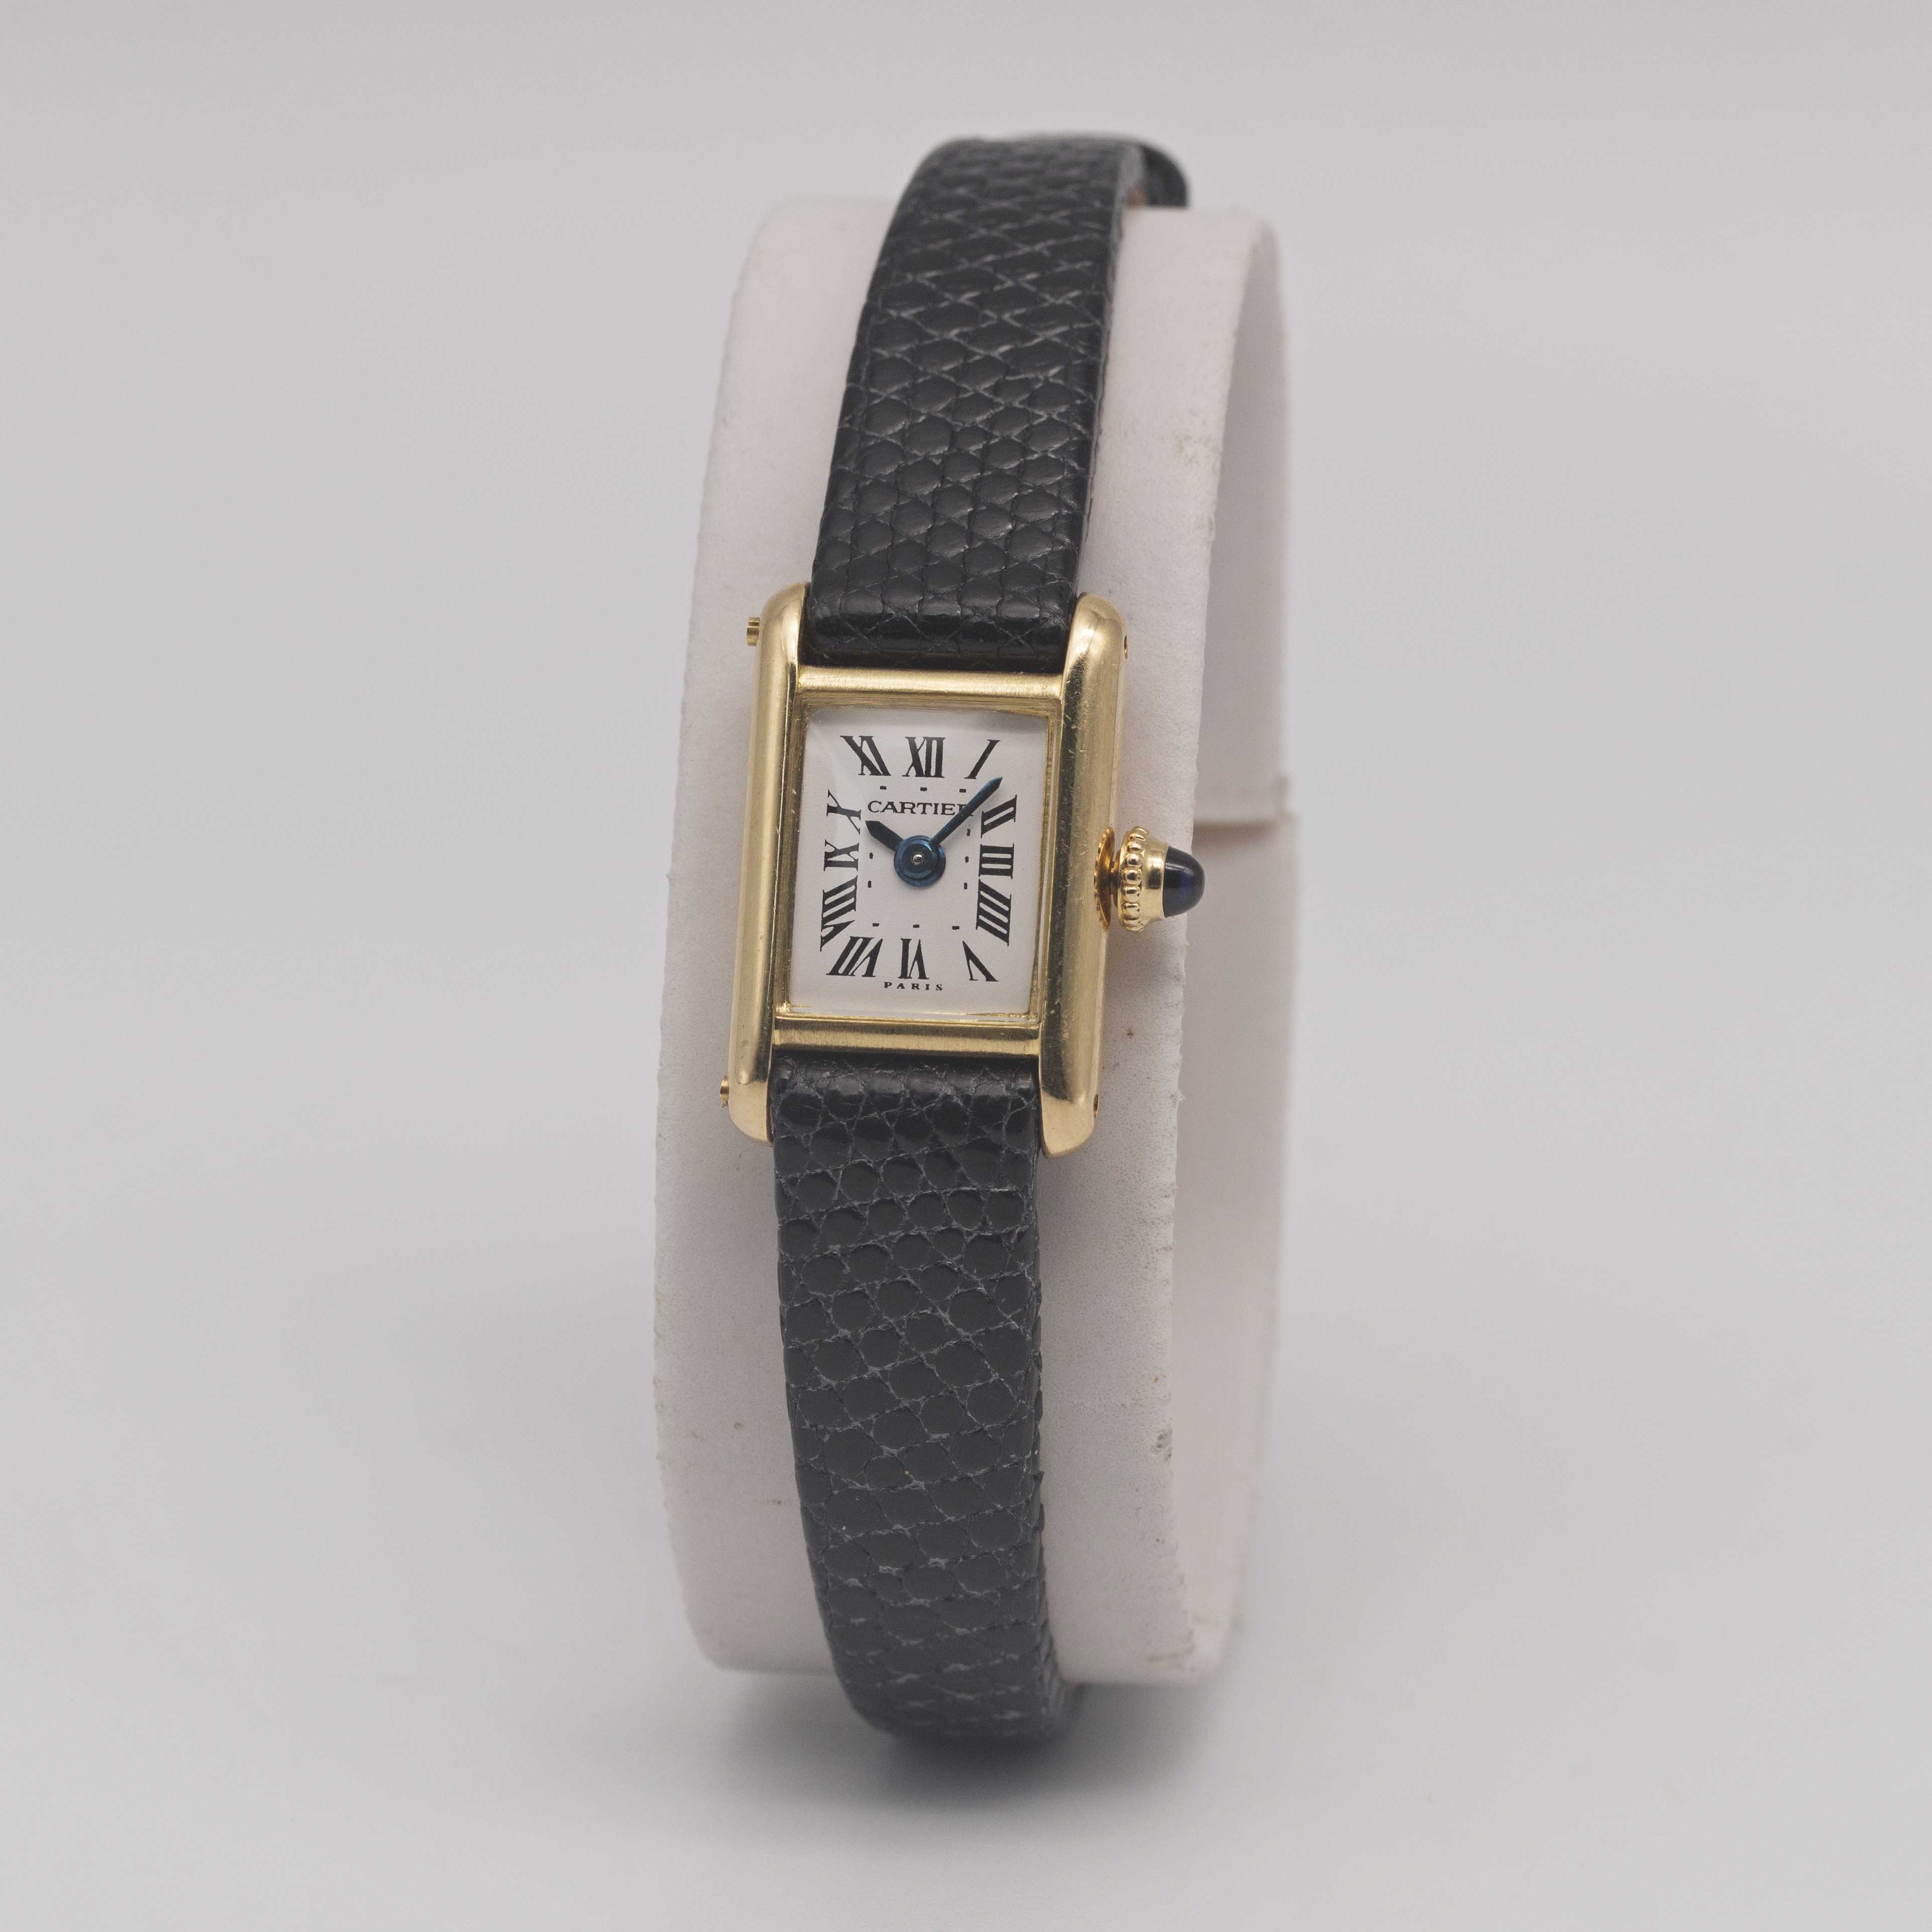 A LADIES 18K SOLID GOLD CARTIER PARIS "MINI" TANK WRIST WATCH CIRCA 1970s, WITH MANUAL WIND CAL. 845 - Image 4 of 11